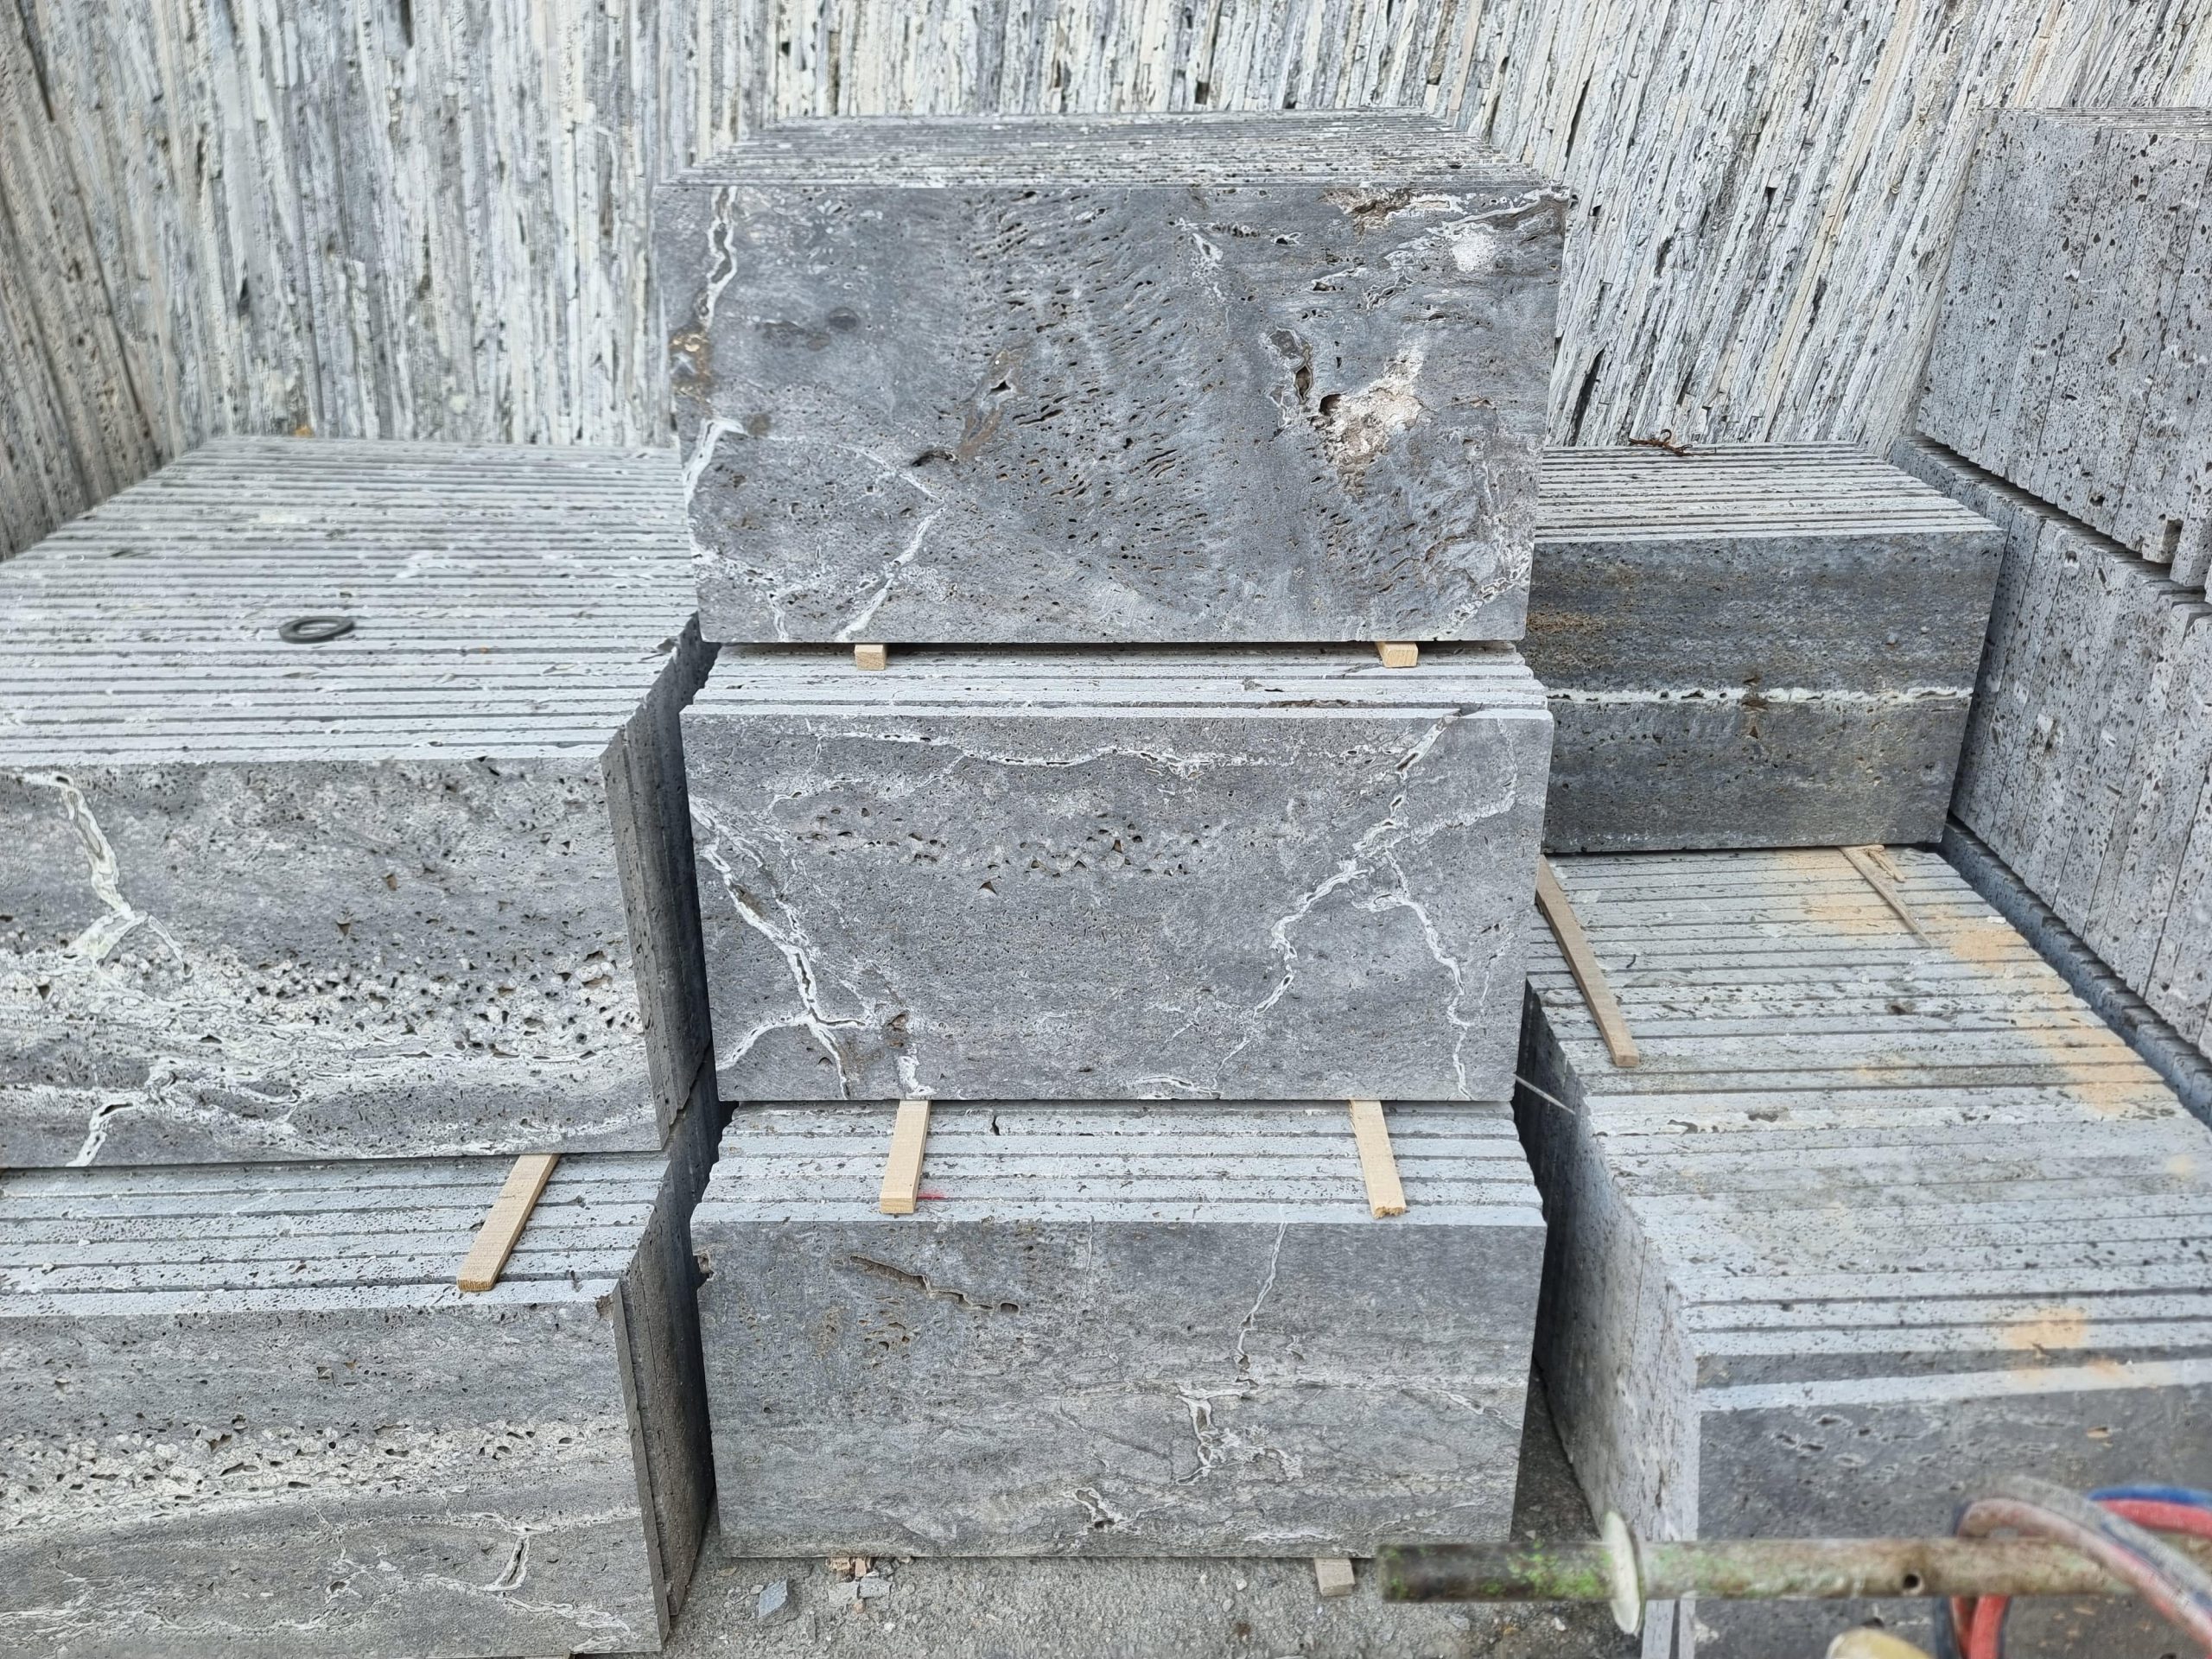 - Silver travertine stone - an economical option for construction